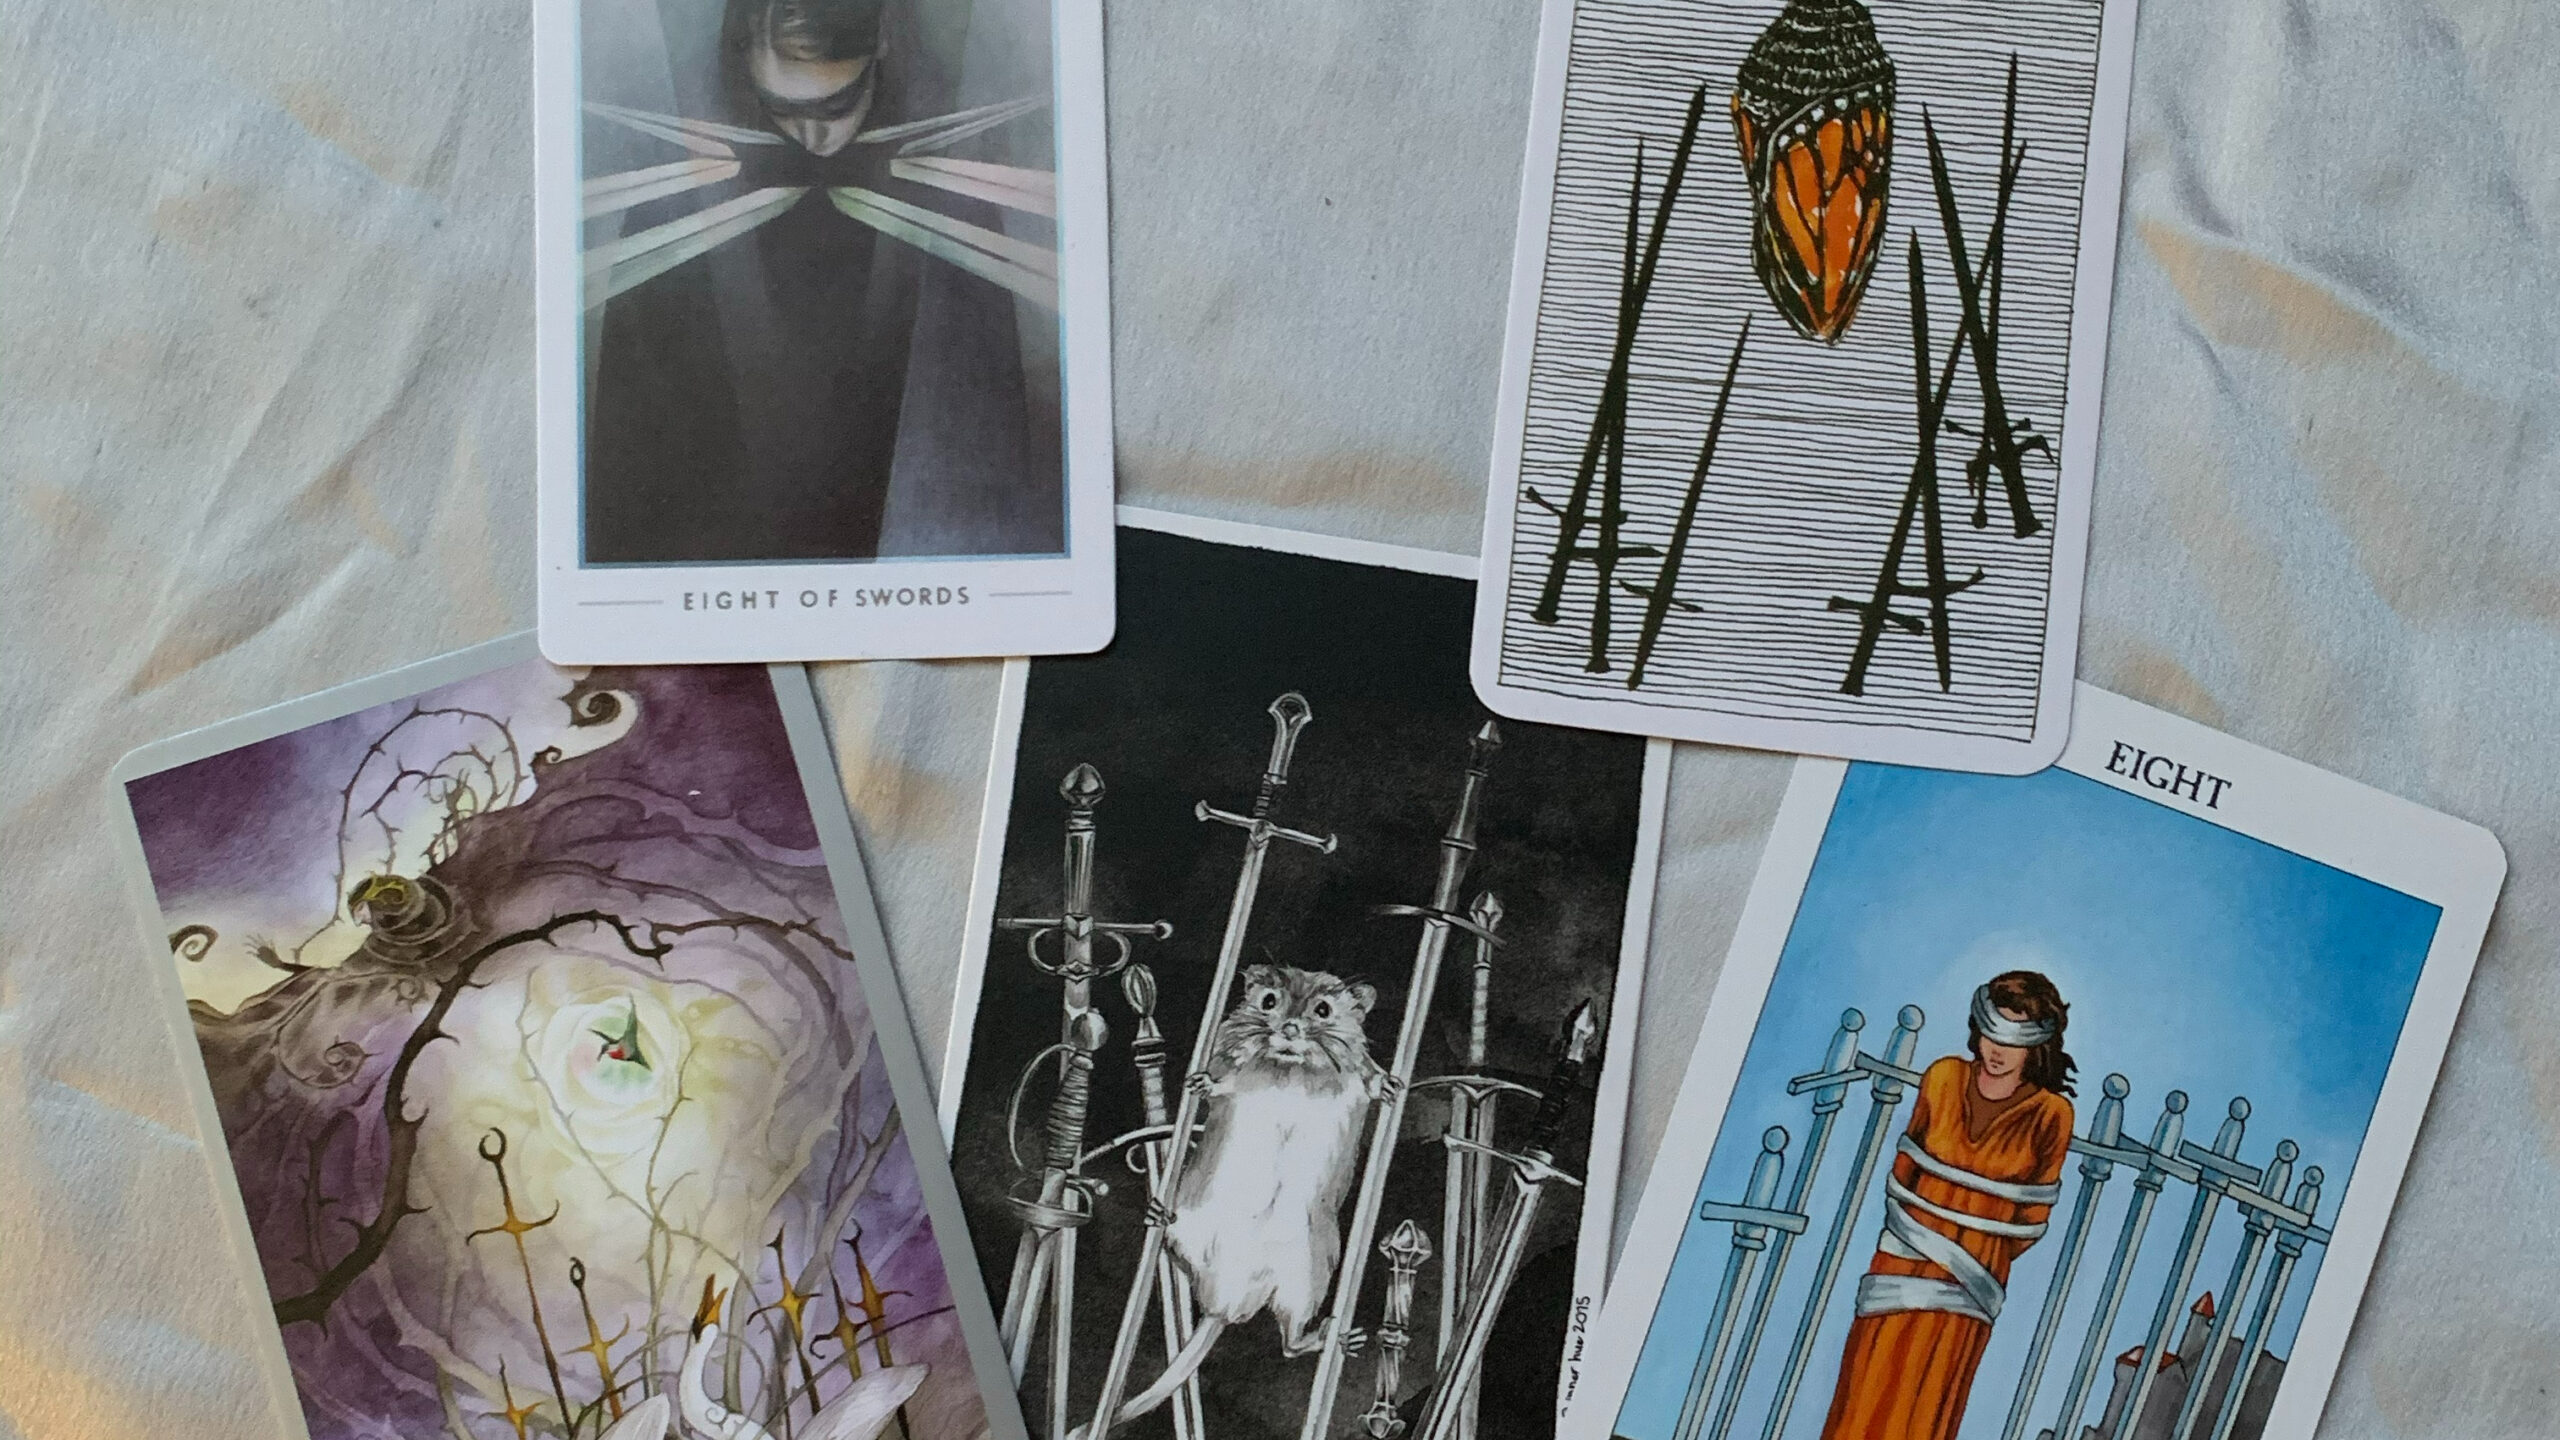 8 of Swords: Comparing Thoth & Rider Waite Tarot Systems